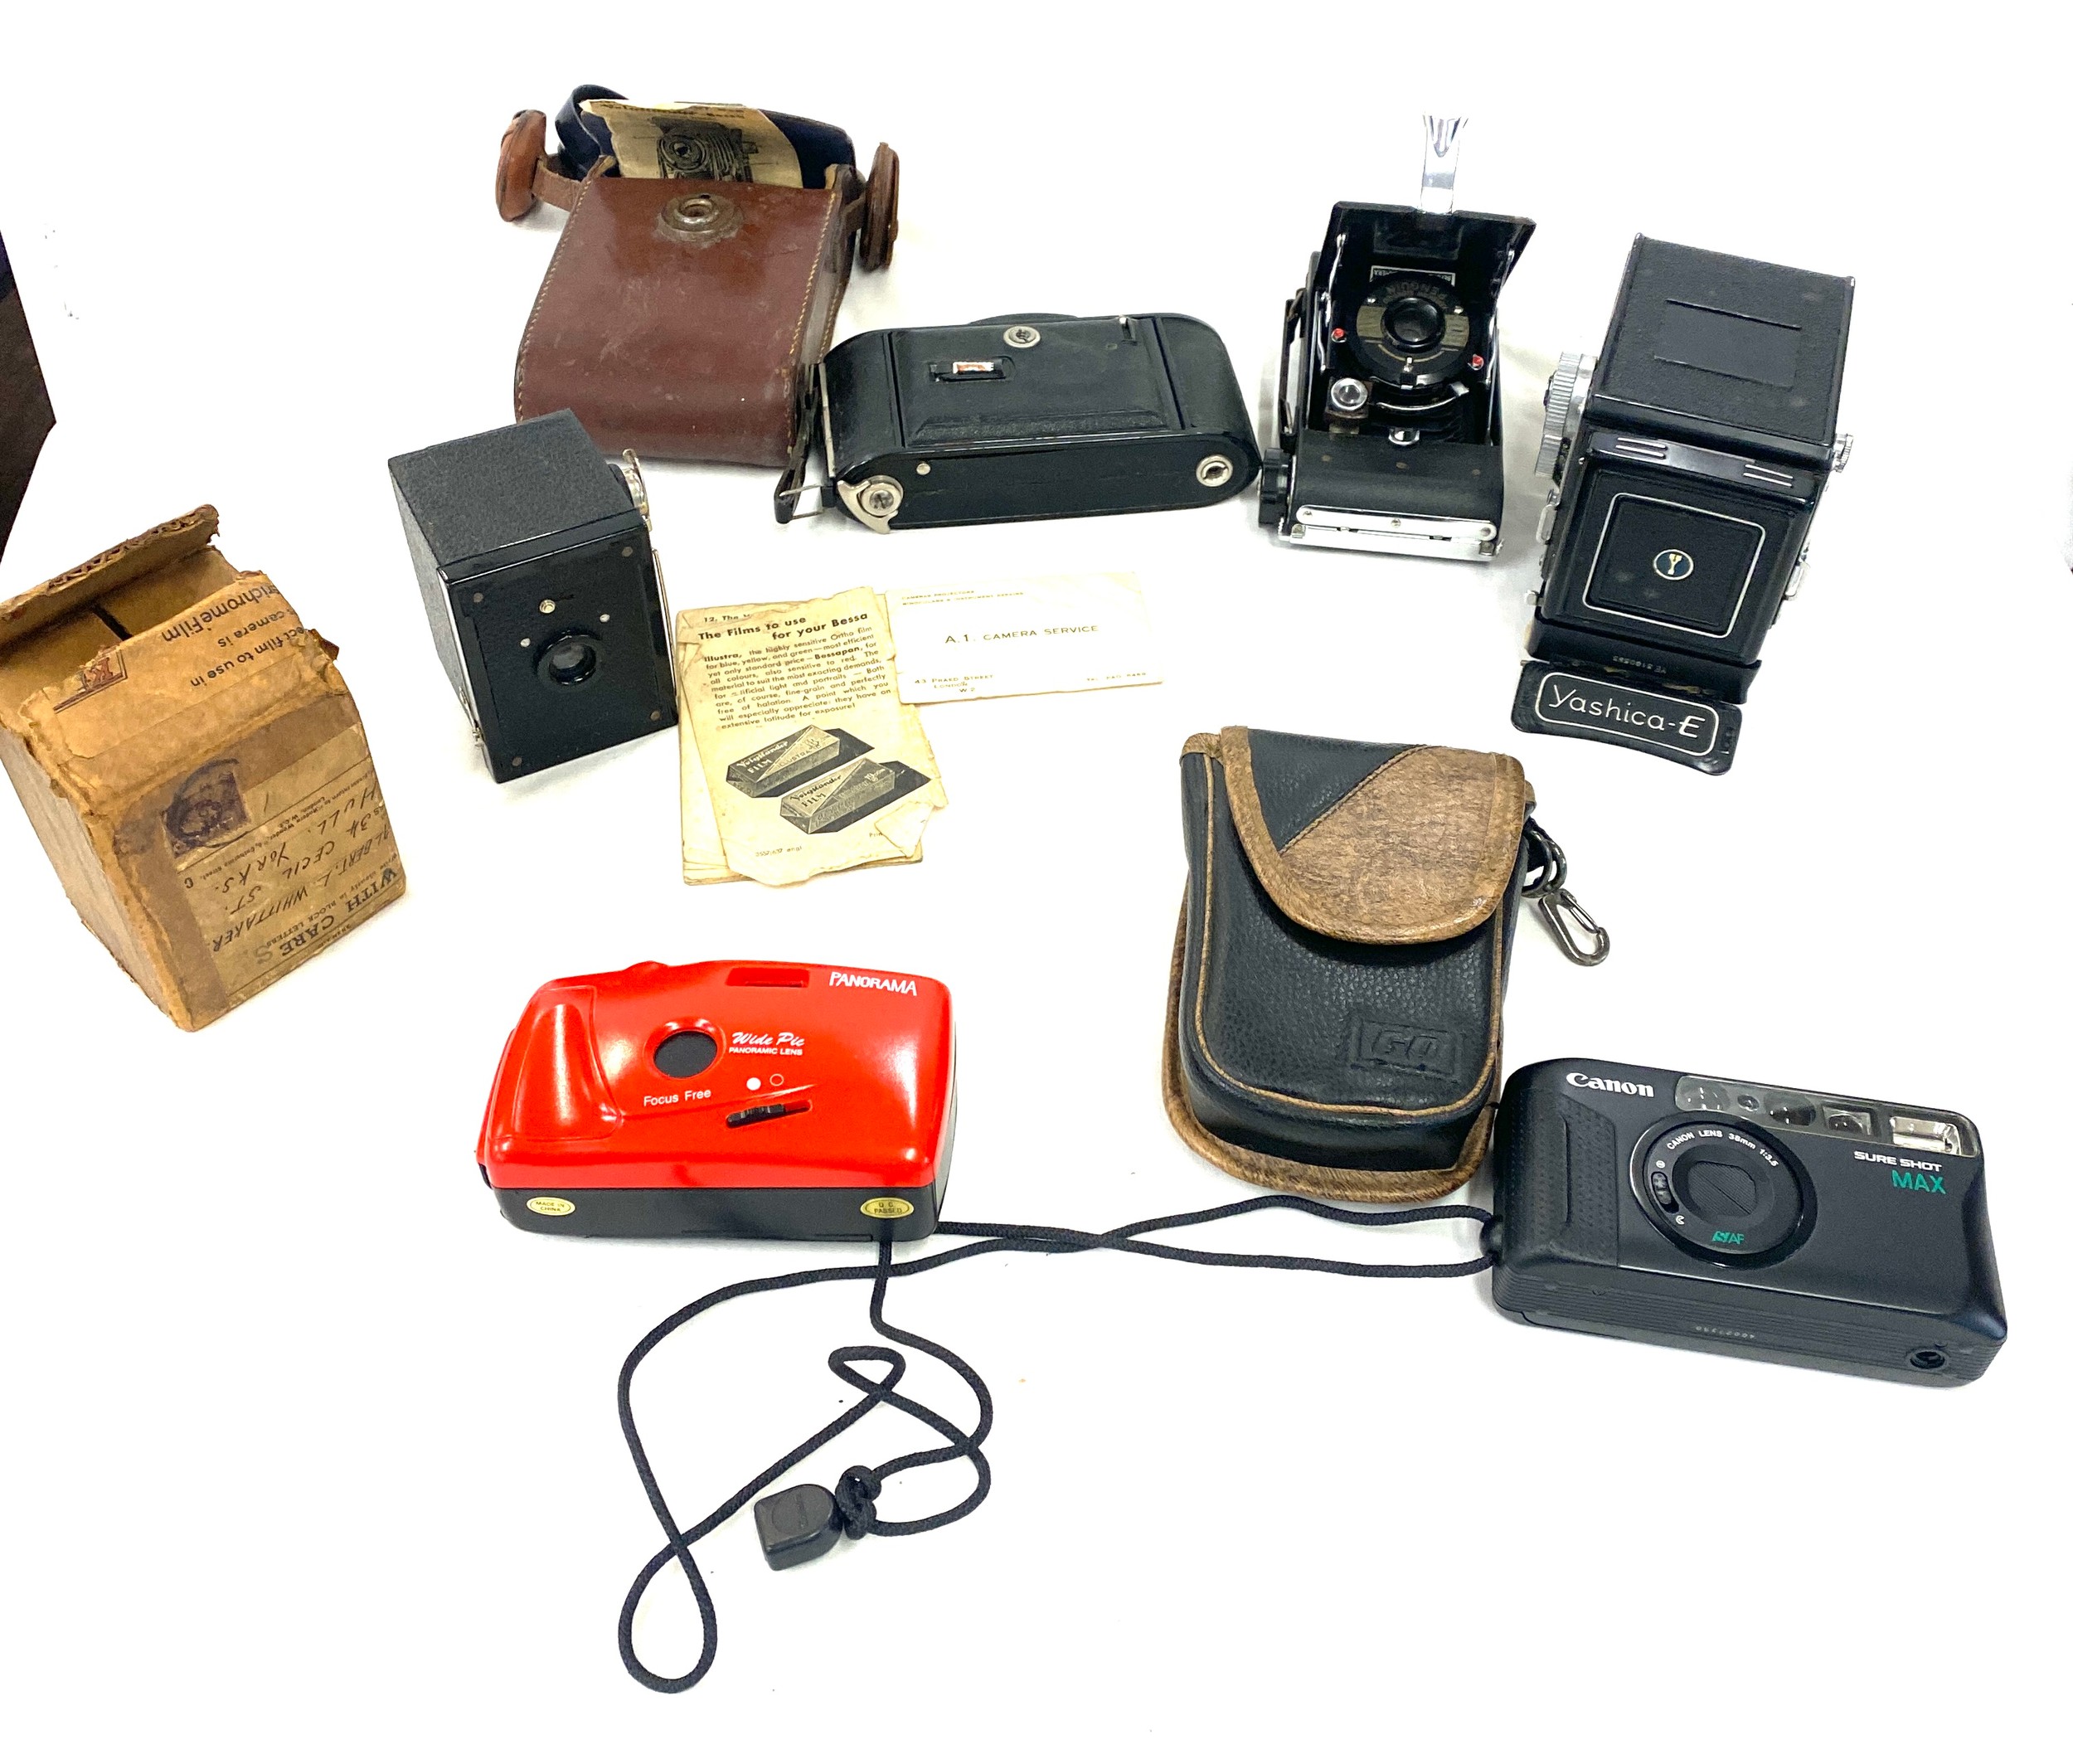 Selection of vintage cameras includes Yashica E, Penguin kershaw eight 20, yuighander bessa camera